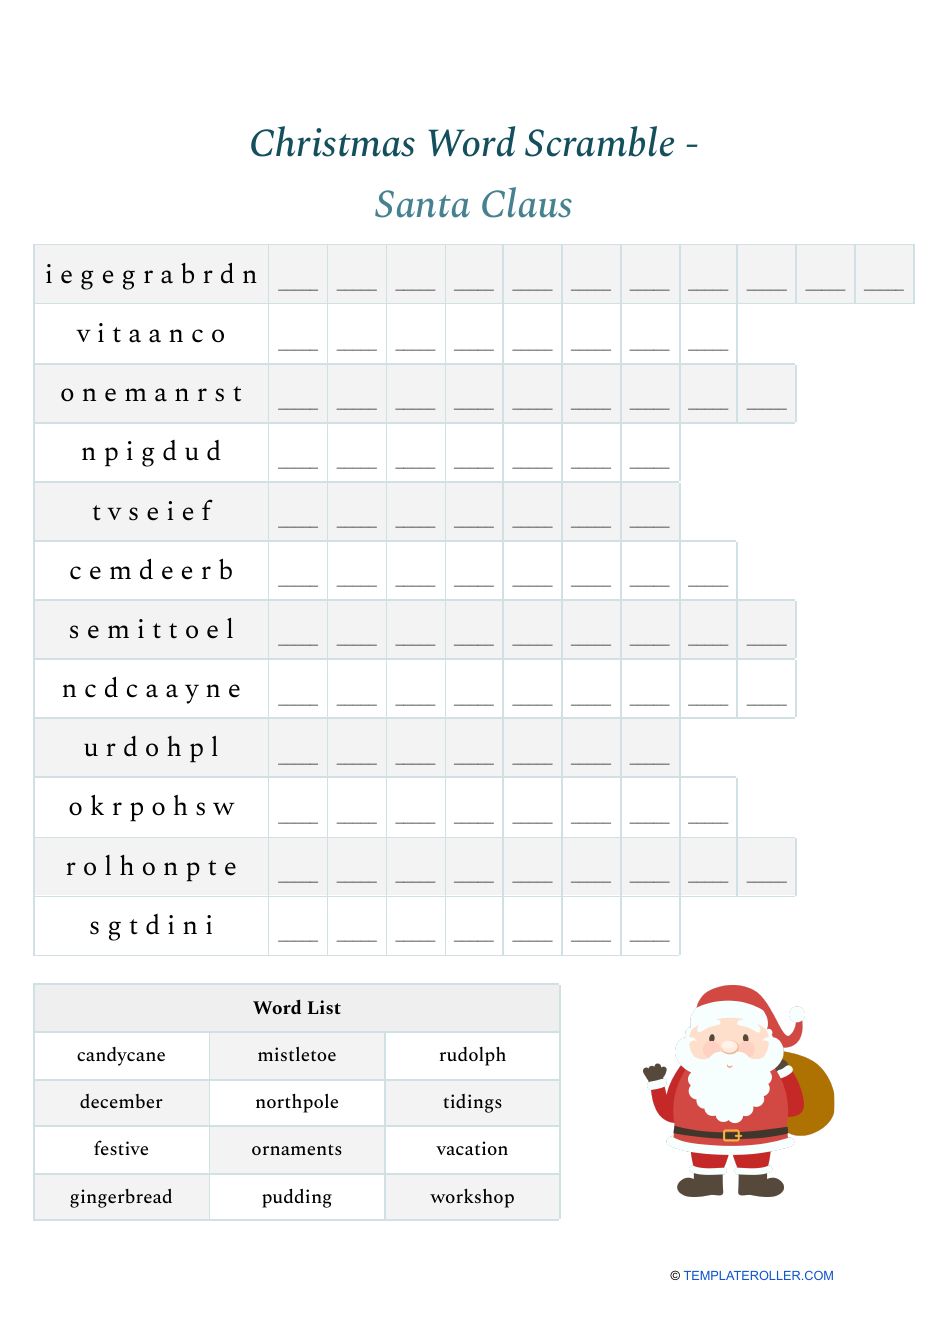 Image preview of Christmas Word Scramble document featuring text "Santa Claus